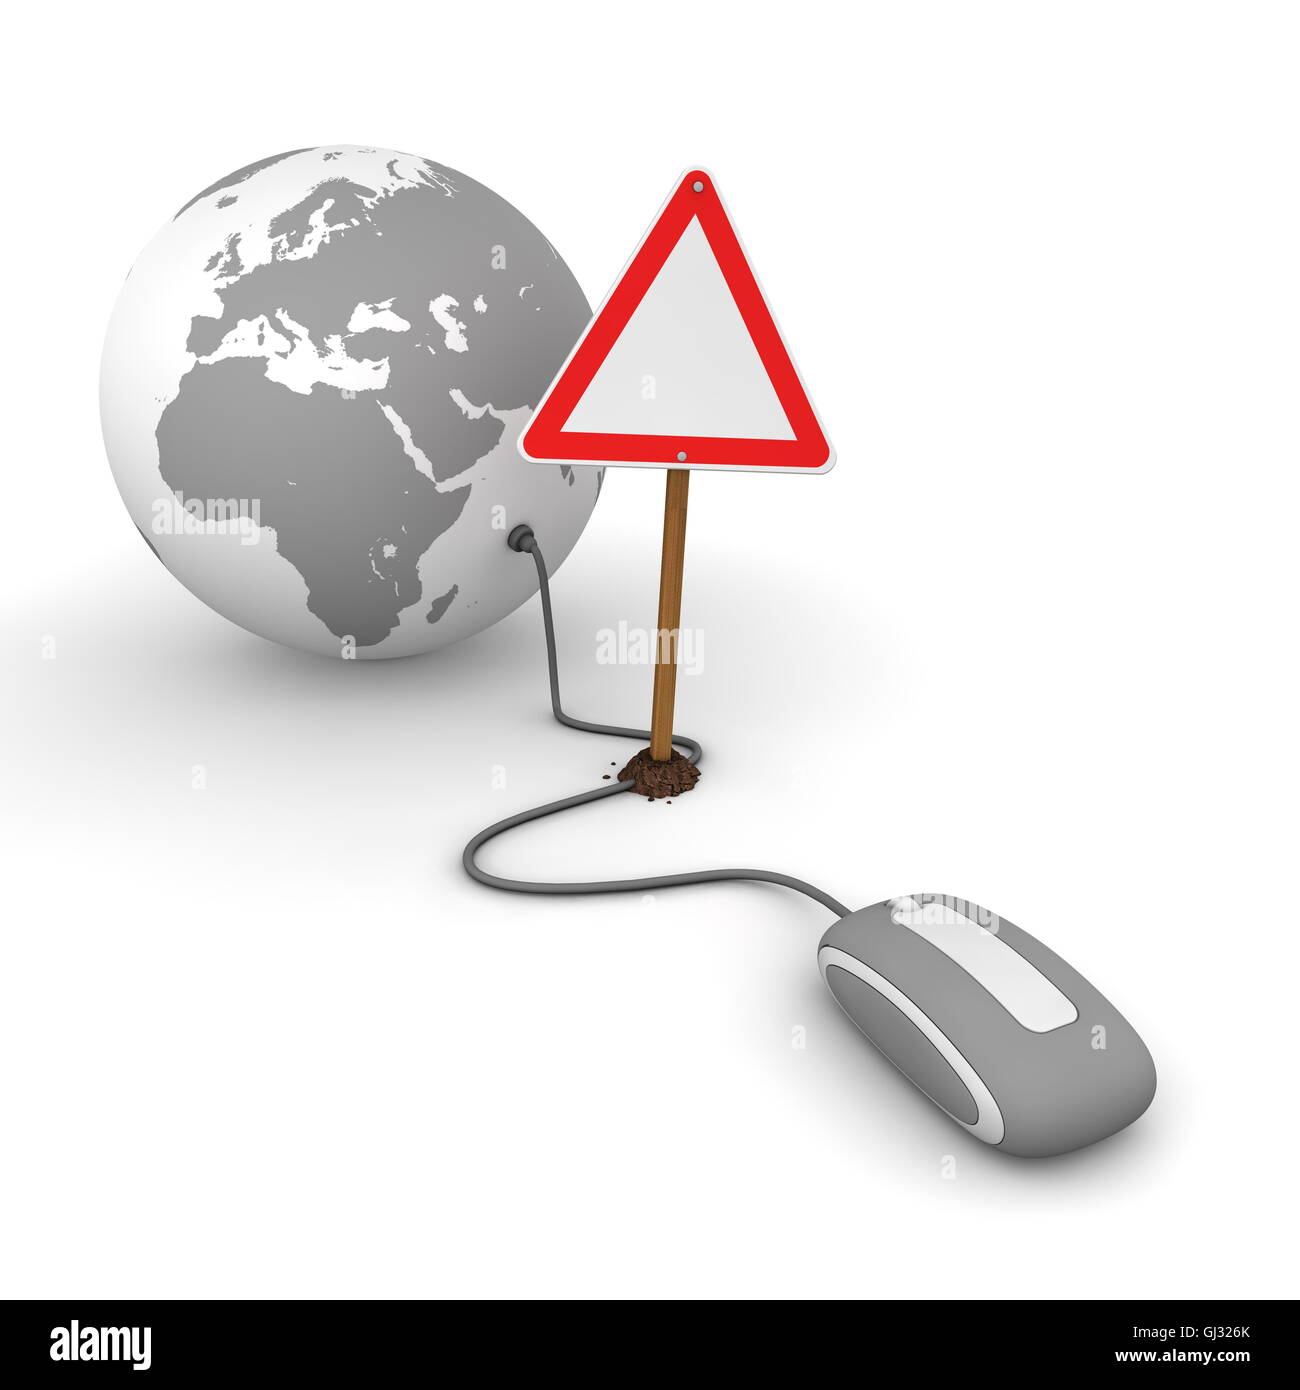 Surfing the Web in Grey - Blocked by a Triangular Warning Sign Stock Photo